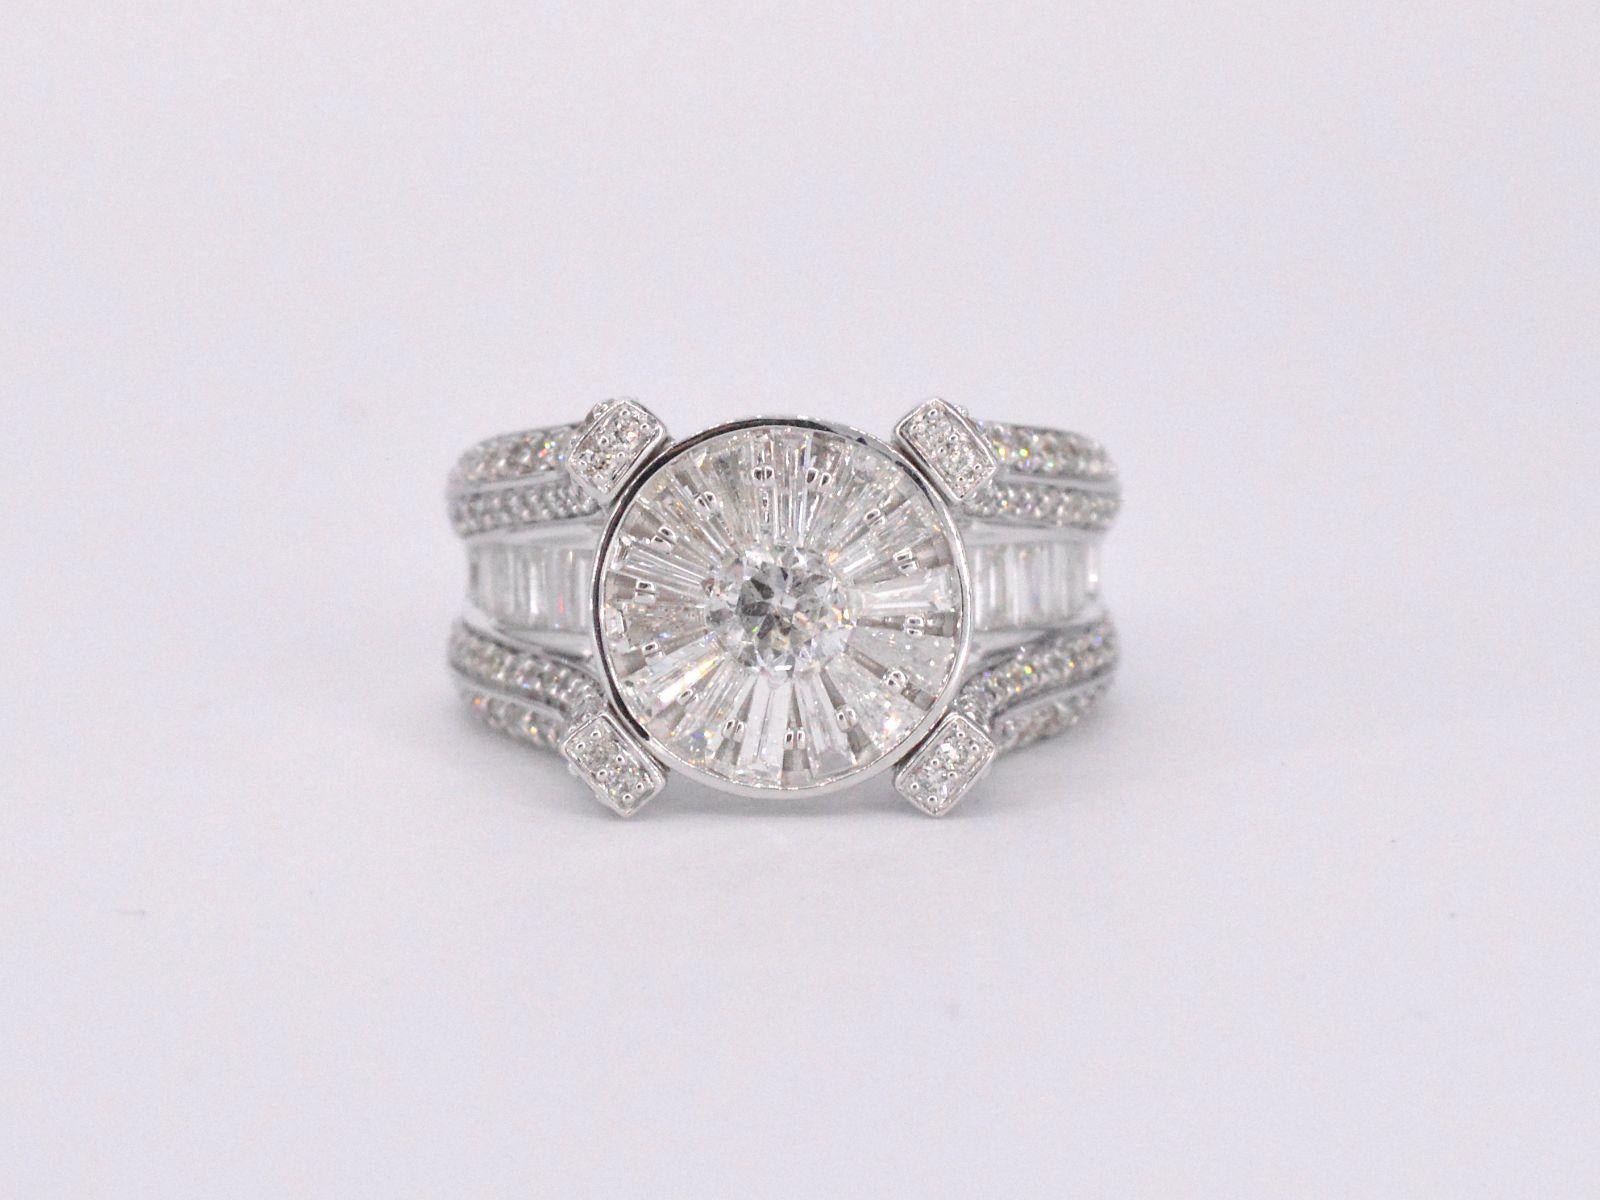 Women's White Gold Ring with 2.50 Carat Diamond For Sale